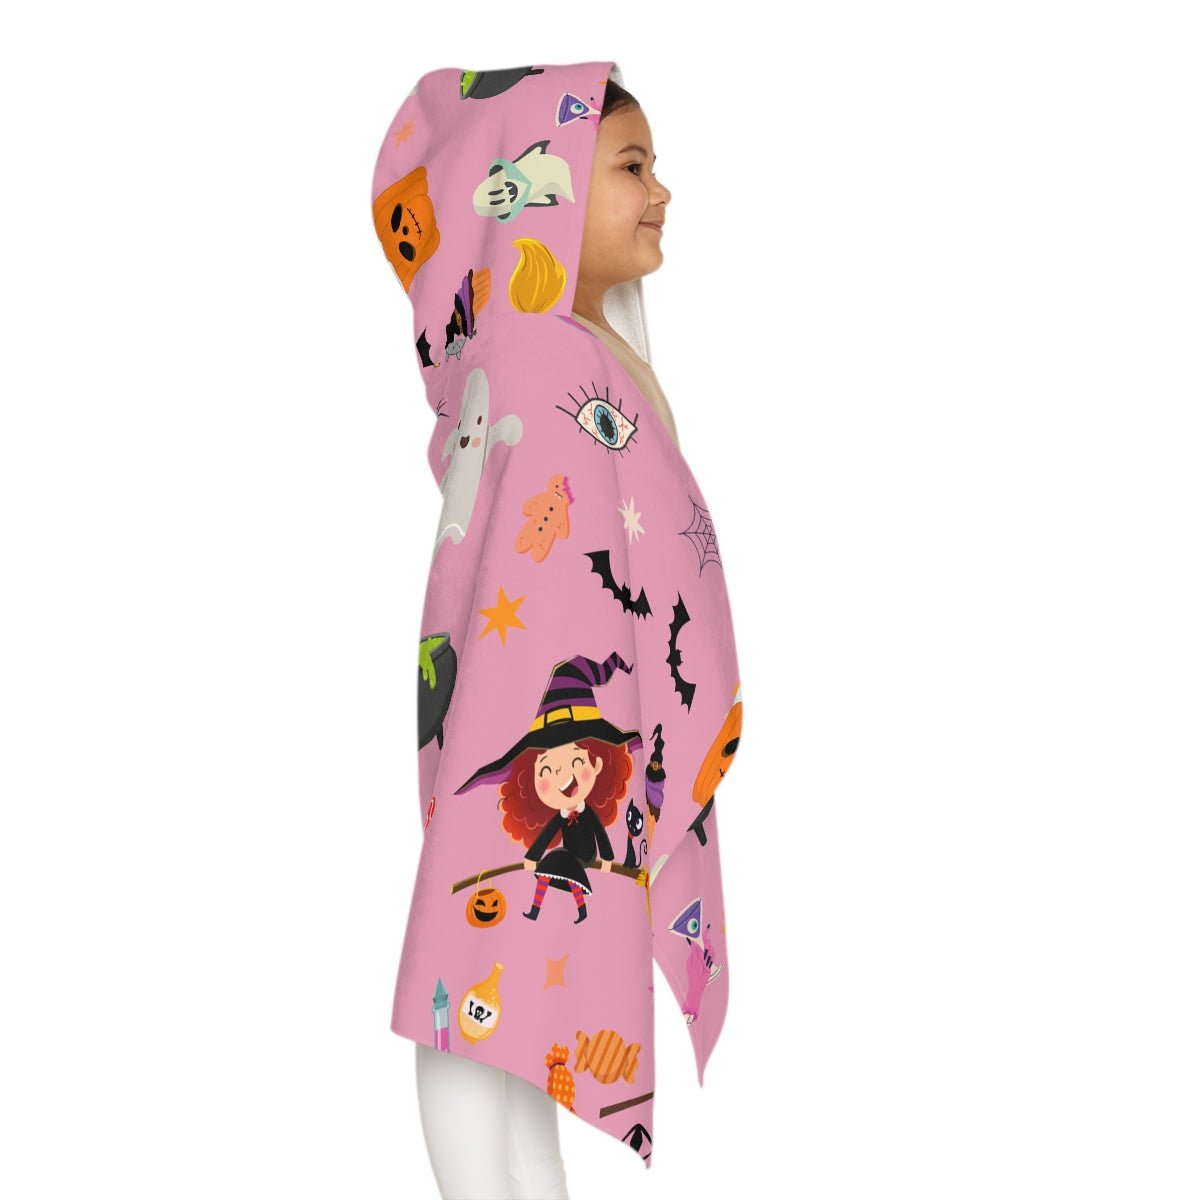 Happy Halloween Toddler Hooded Towel - Puffin Lime